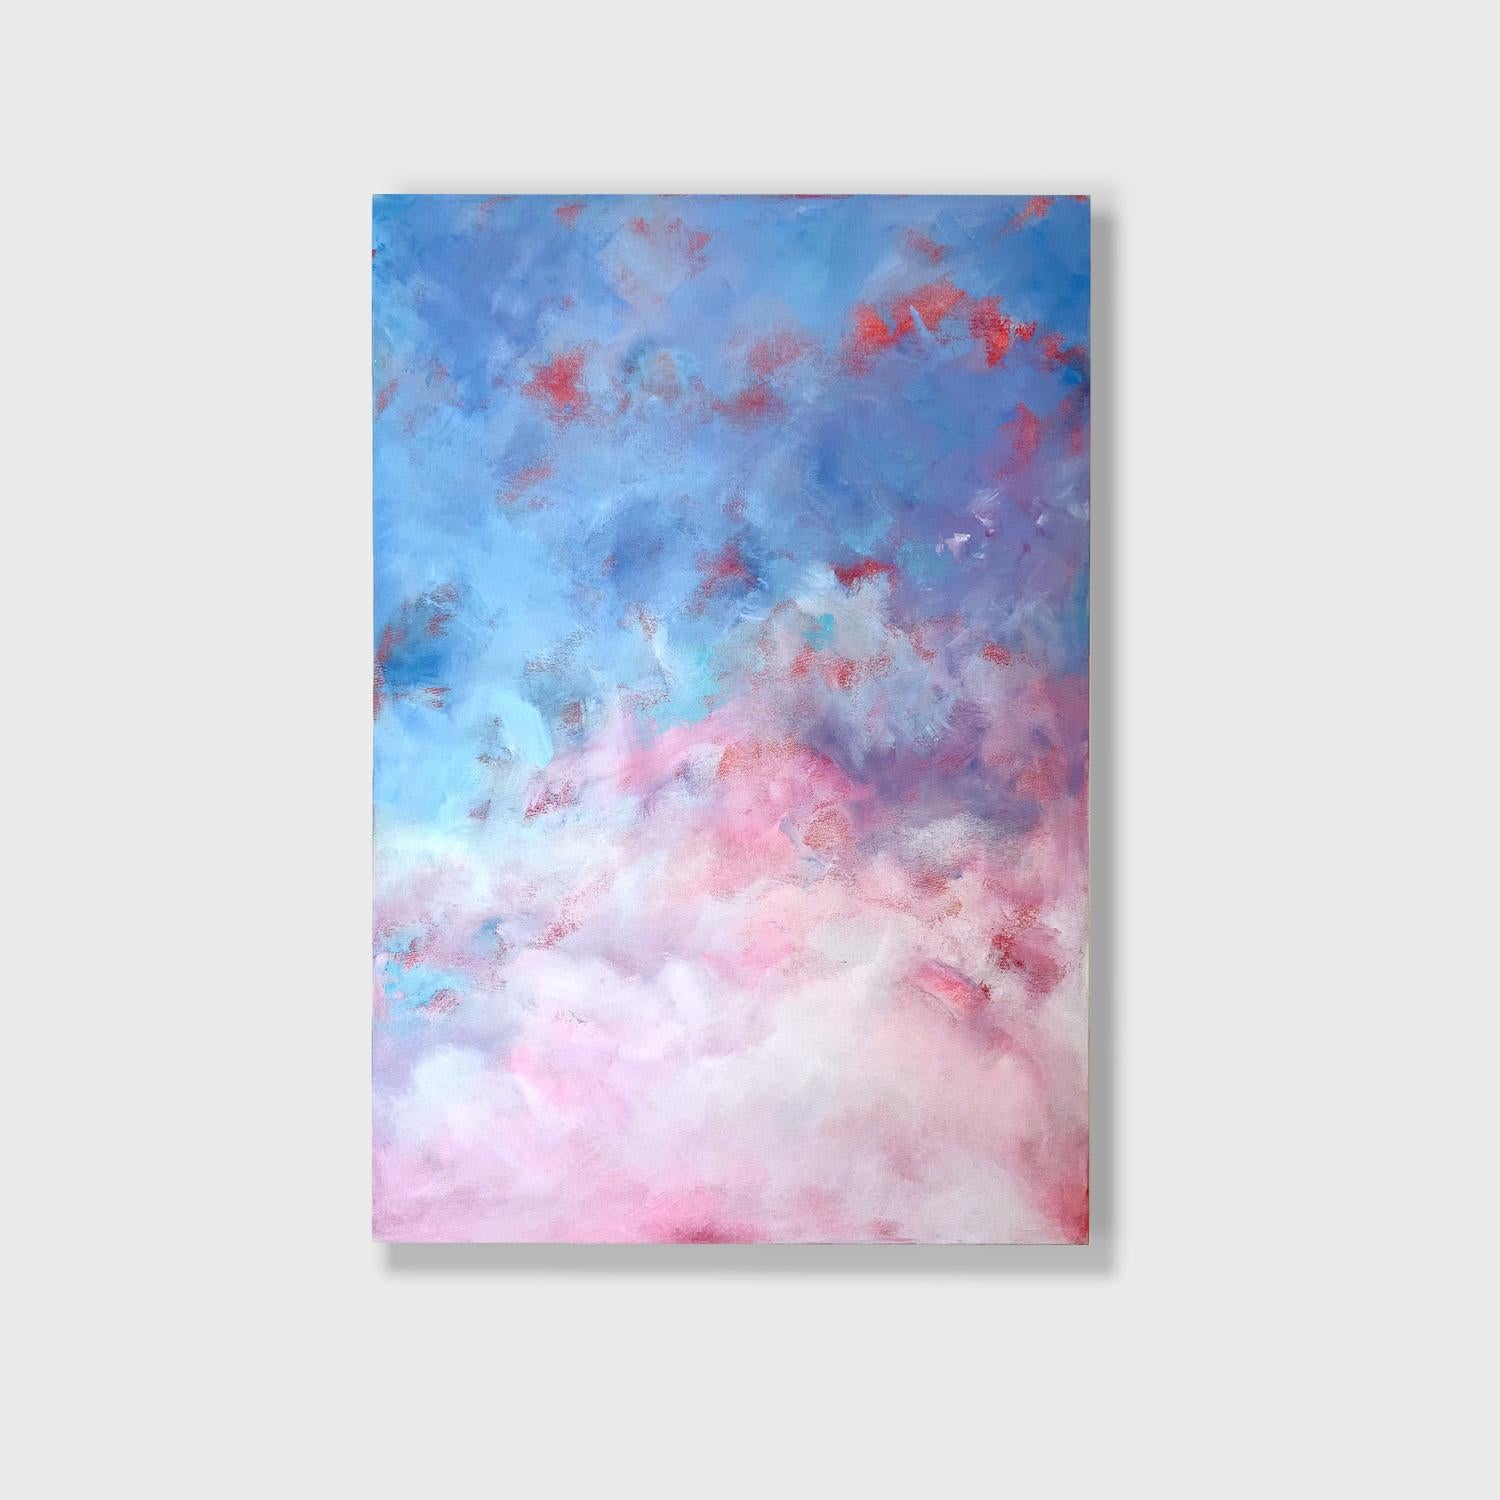 Stefanie Bales Abstract Painting - An Impressionist Acrylic on Canvas Painting, "Cotton Candy Clouds"